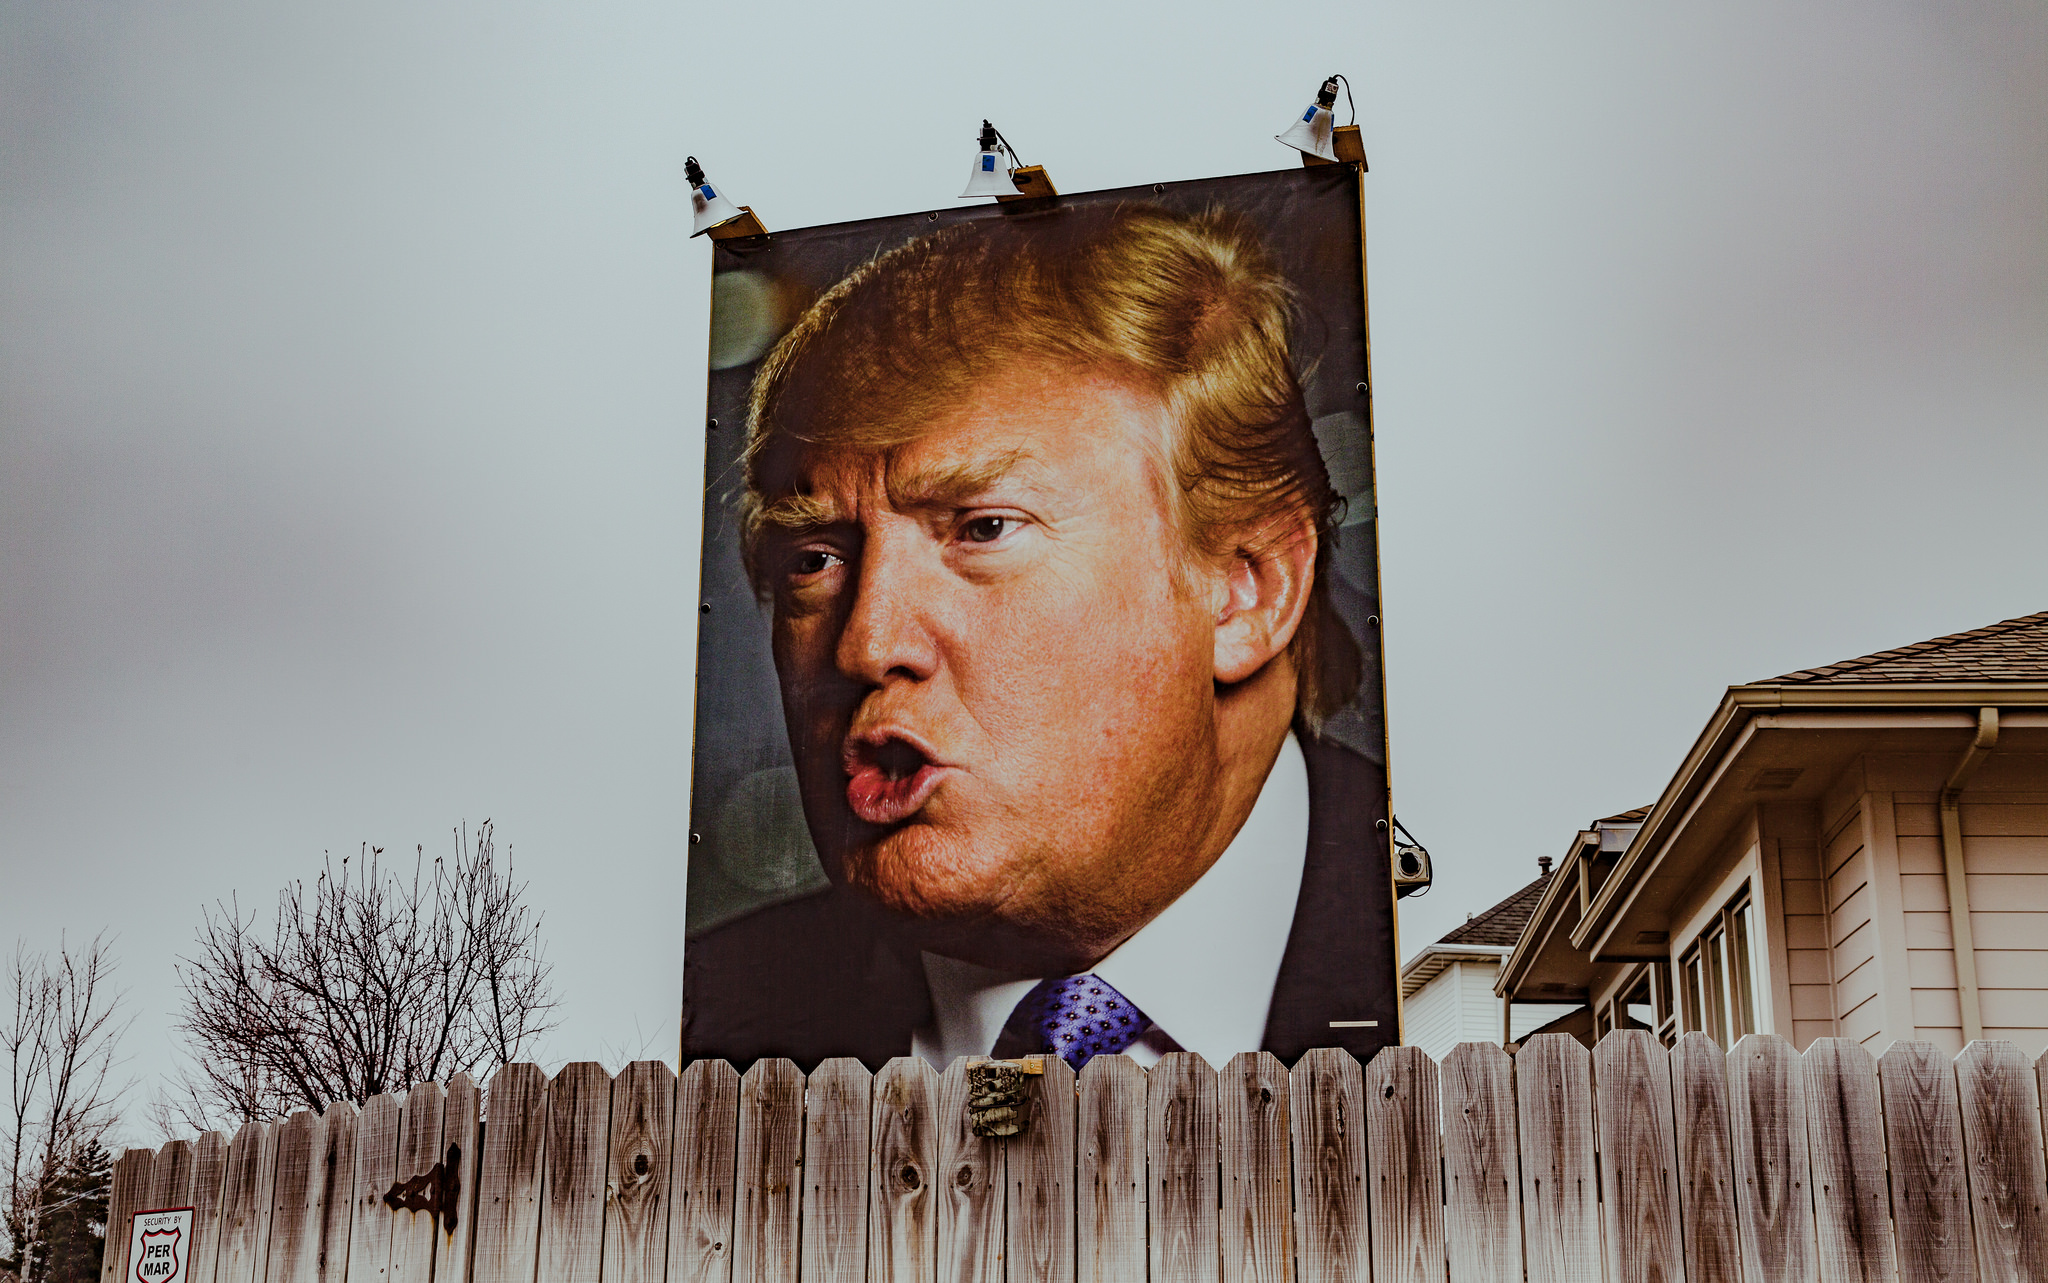 "Donald Trump Backyard Portrait Sign - West Des Moines, Iowa" by Tony Webster, Flickr. Used according to Creative Commons license.